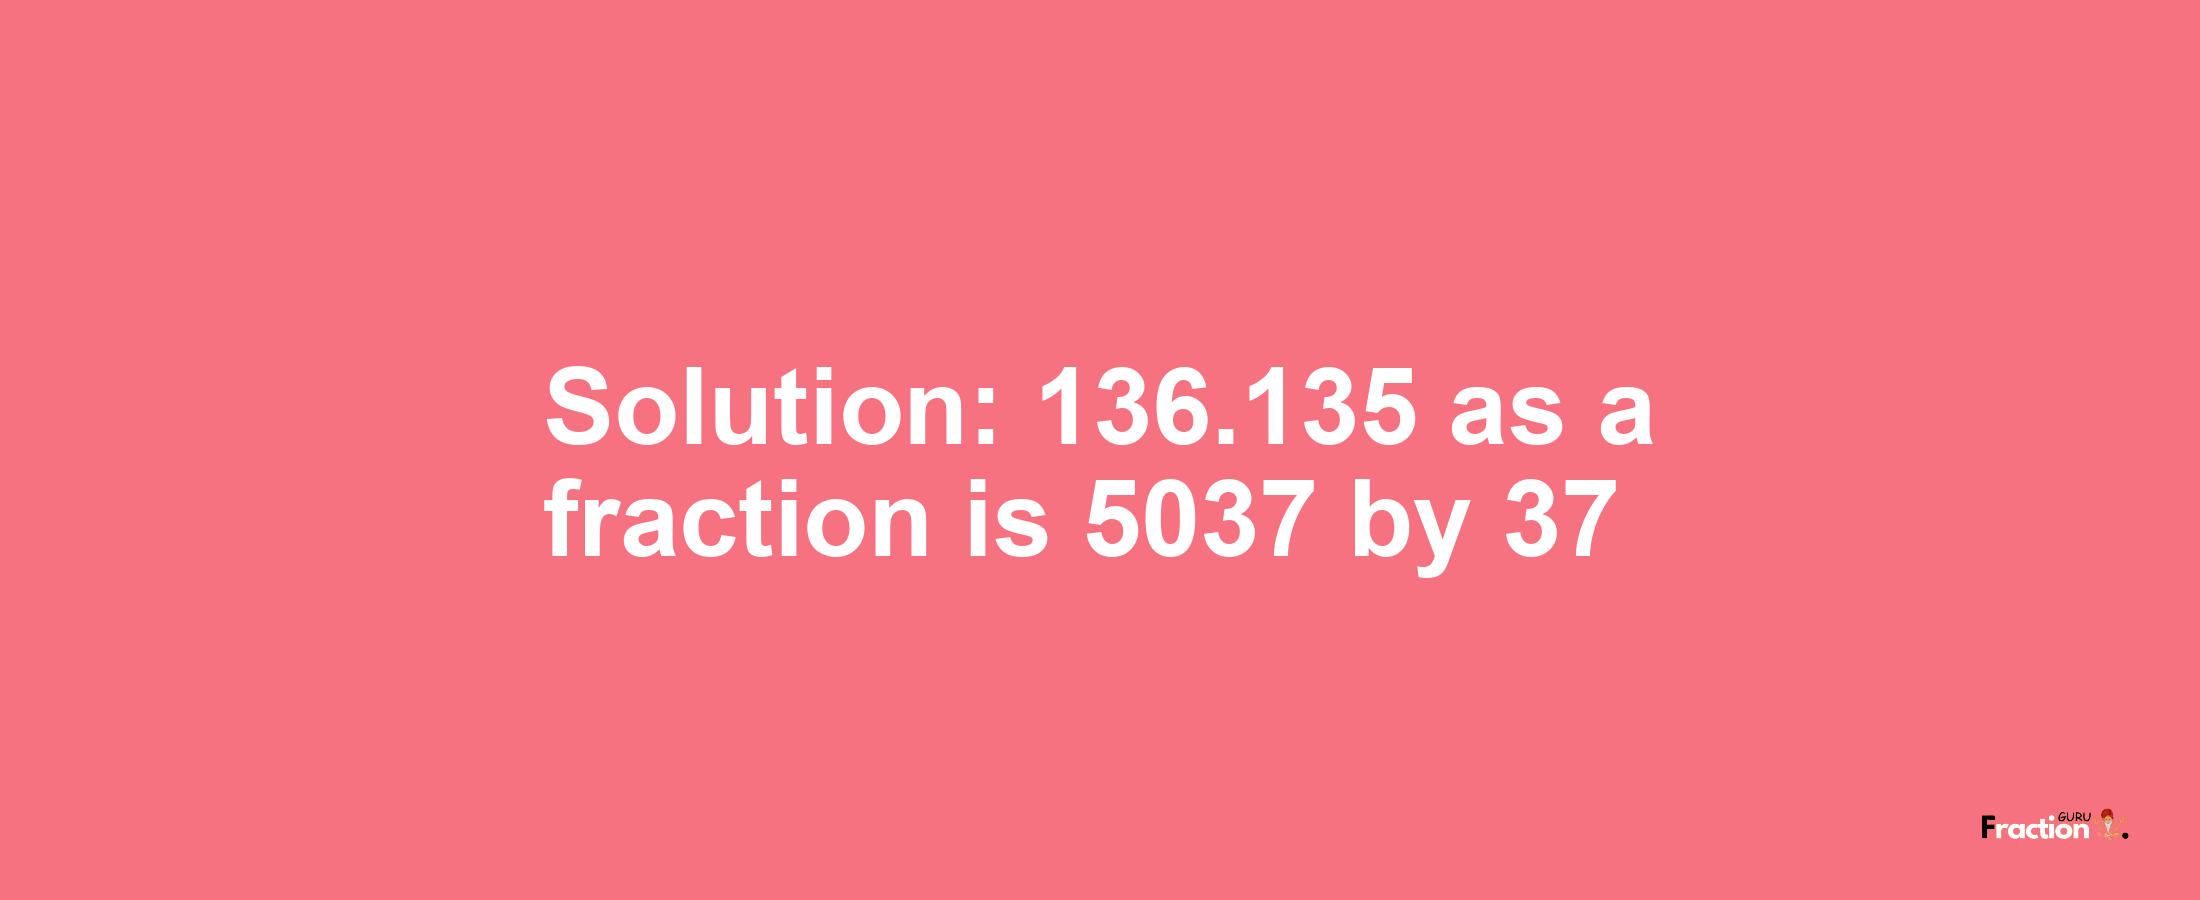 Solution:136.135 as a fraction is 5037/37